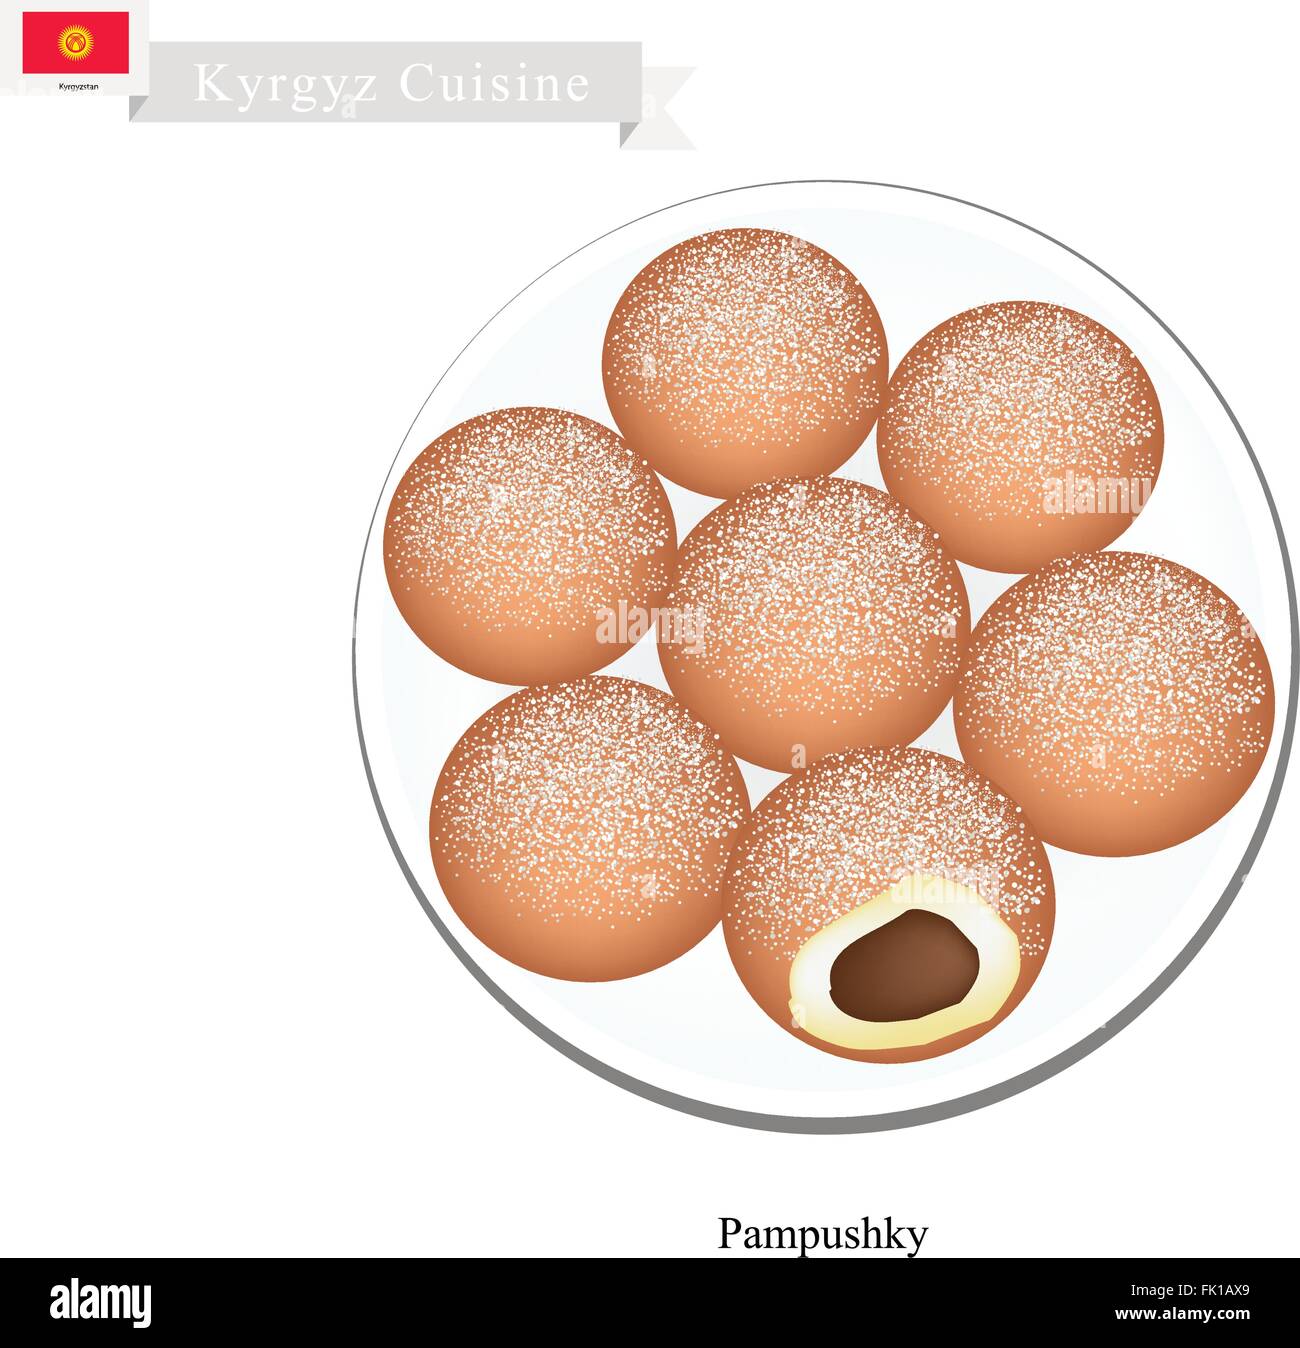 Kyrgyz Cuisine, Pampushky or Sweet Raised Doughnuts Sprinkled with Powdered Sugar or Garlic. One of Most Popular Dish in Kyrgyzs Stock Vector